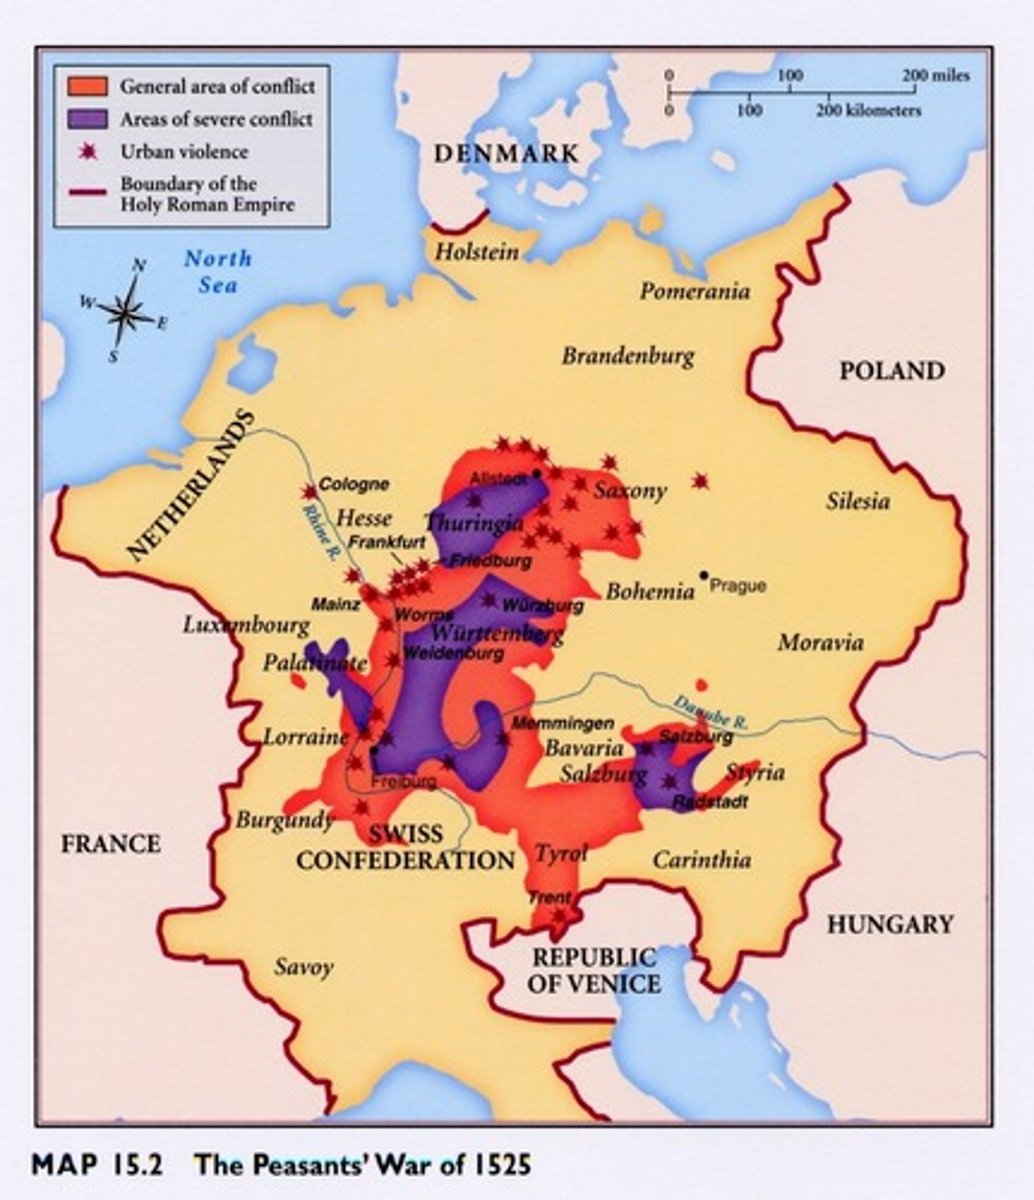 <p>- Central Holy Roman Empire (1525)<br>- Aggravated by Crop Failures in 1523 &amp; 1524<br>- Over 70,000 Peasants Killed By Noble Response</p>